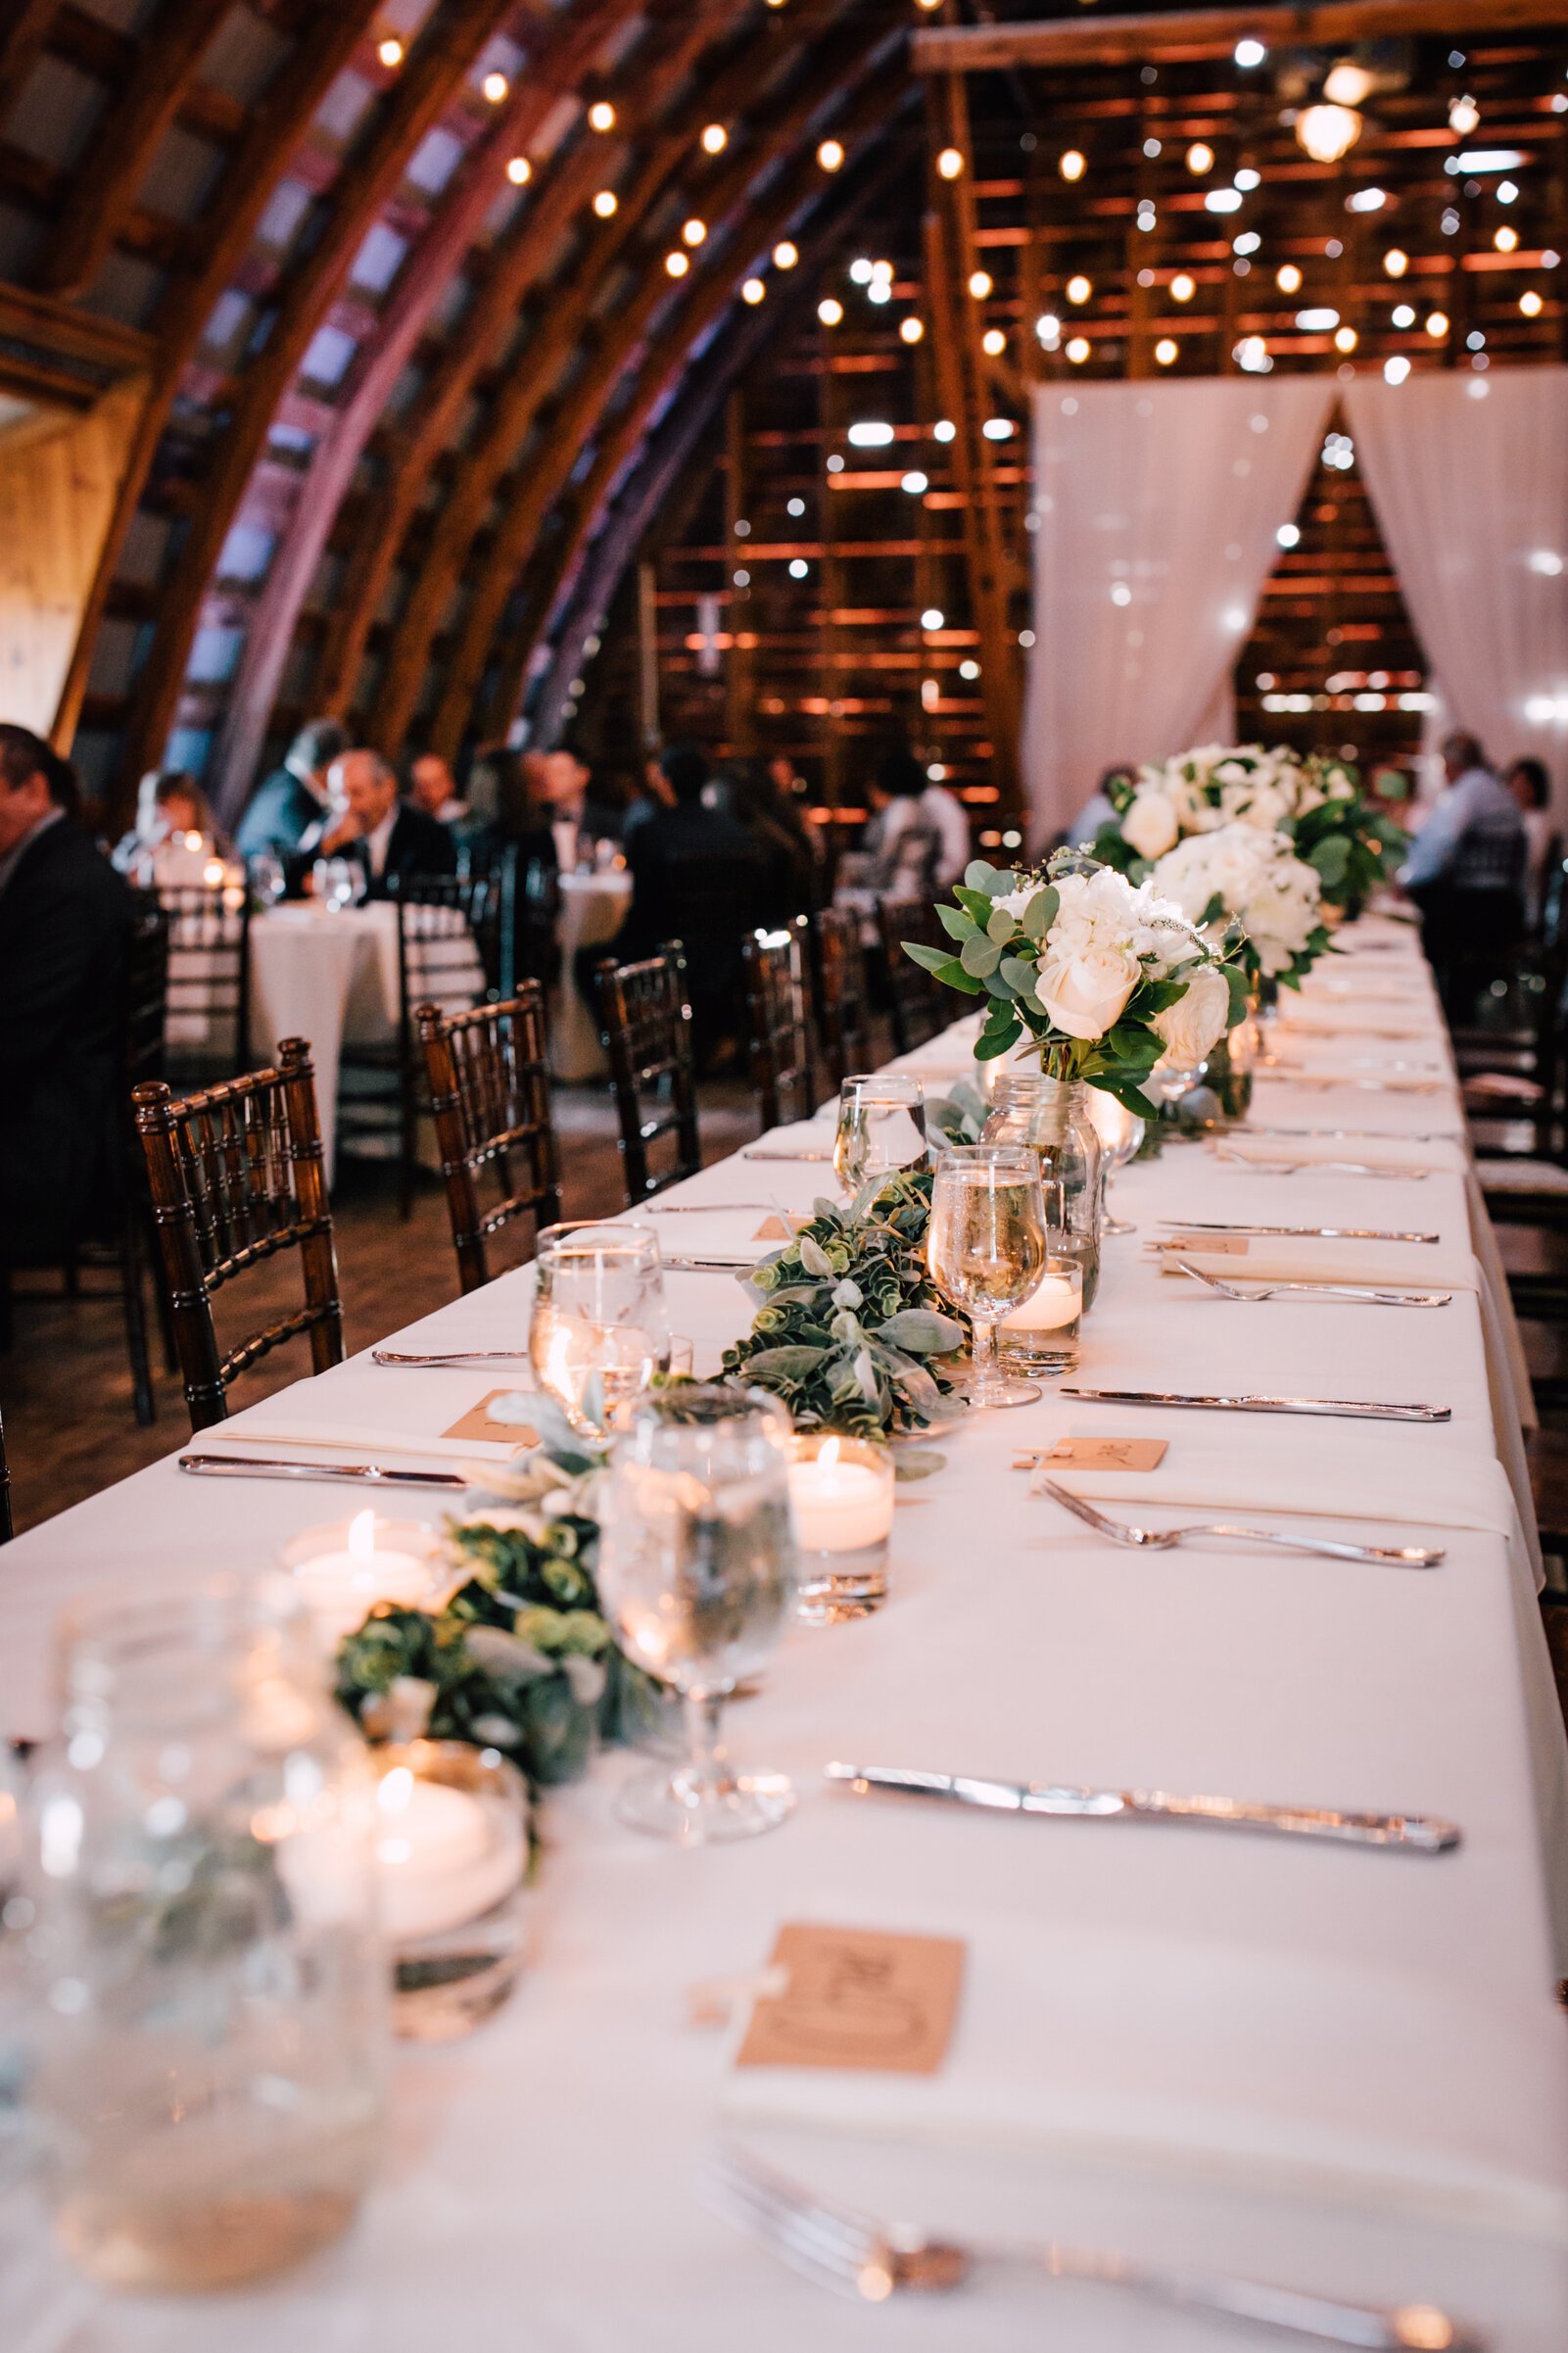  A view of the head table settings for barn wedding decor 